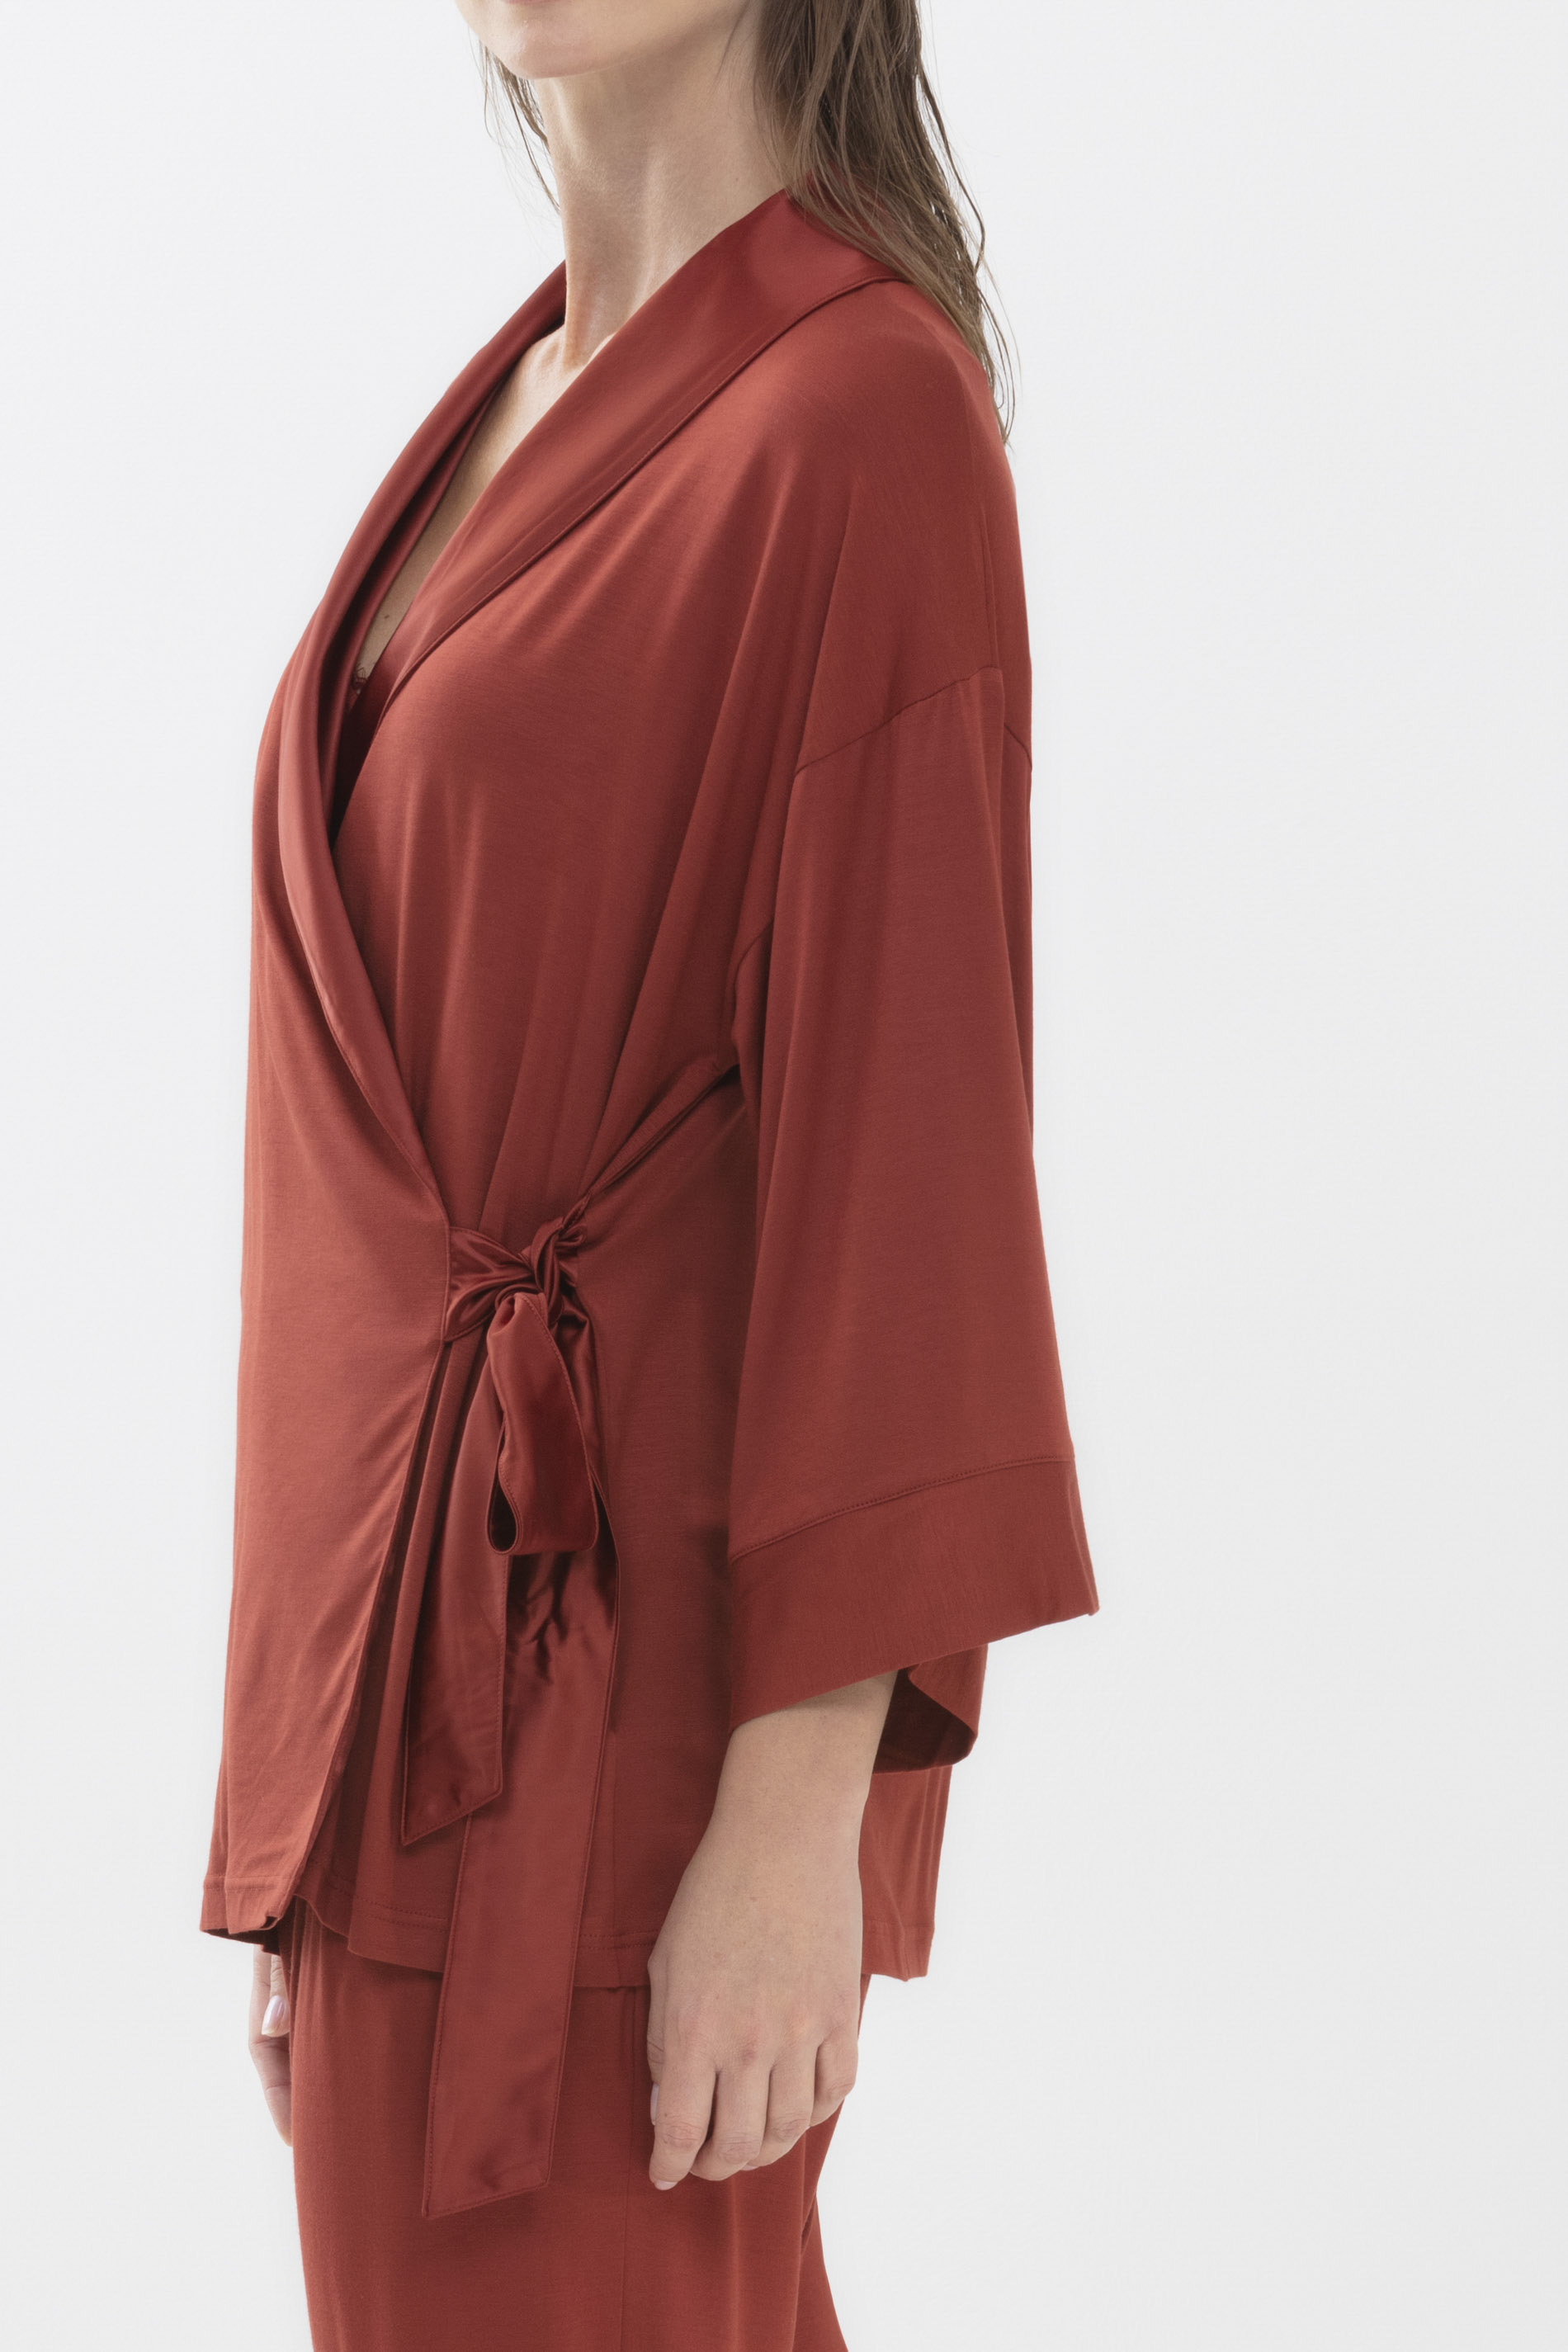 Jacket with 3/4-length sleeves Red Pepper Serie Alena Detail View 02 | mey®